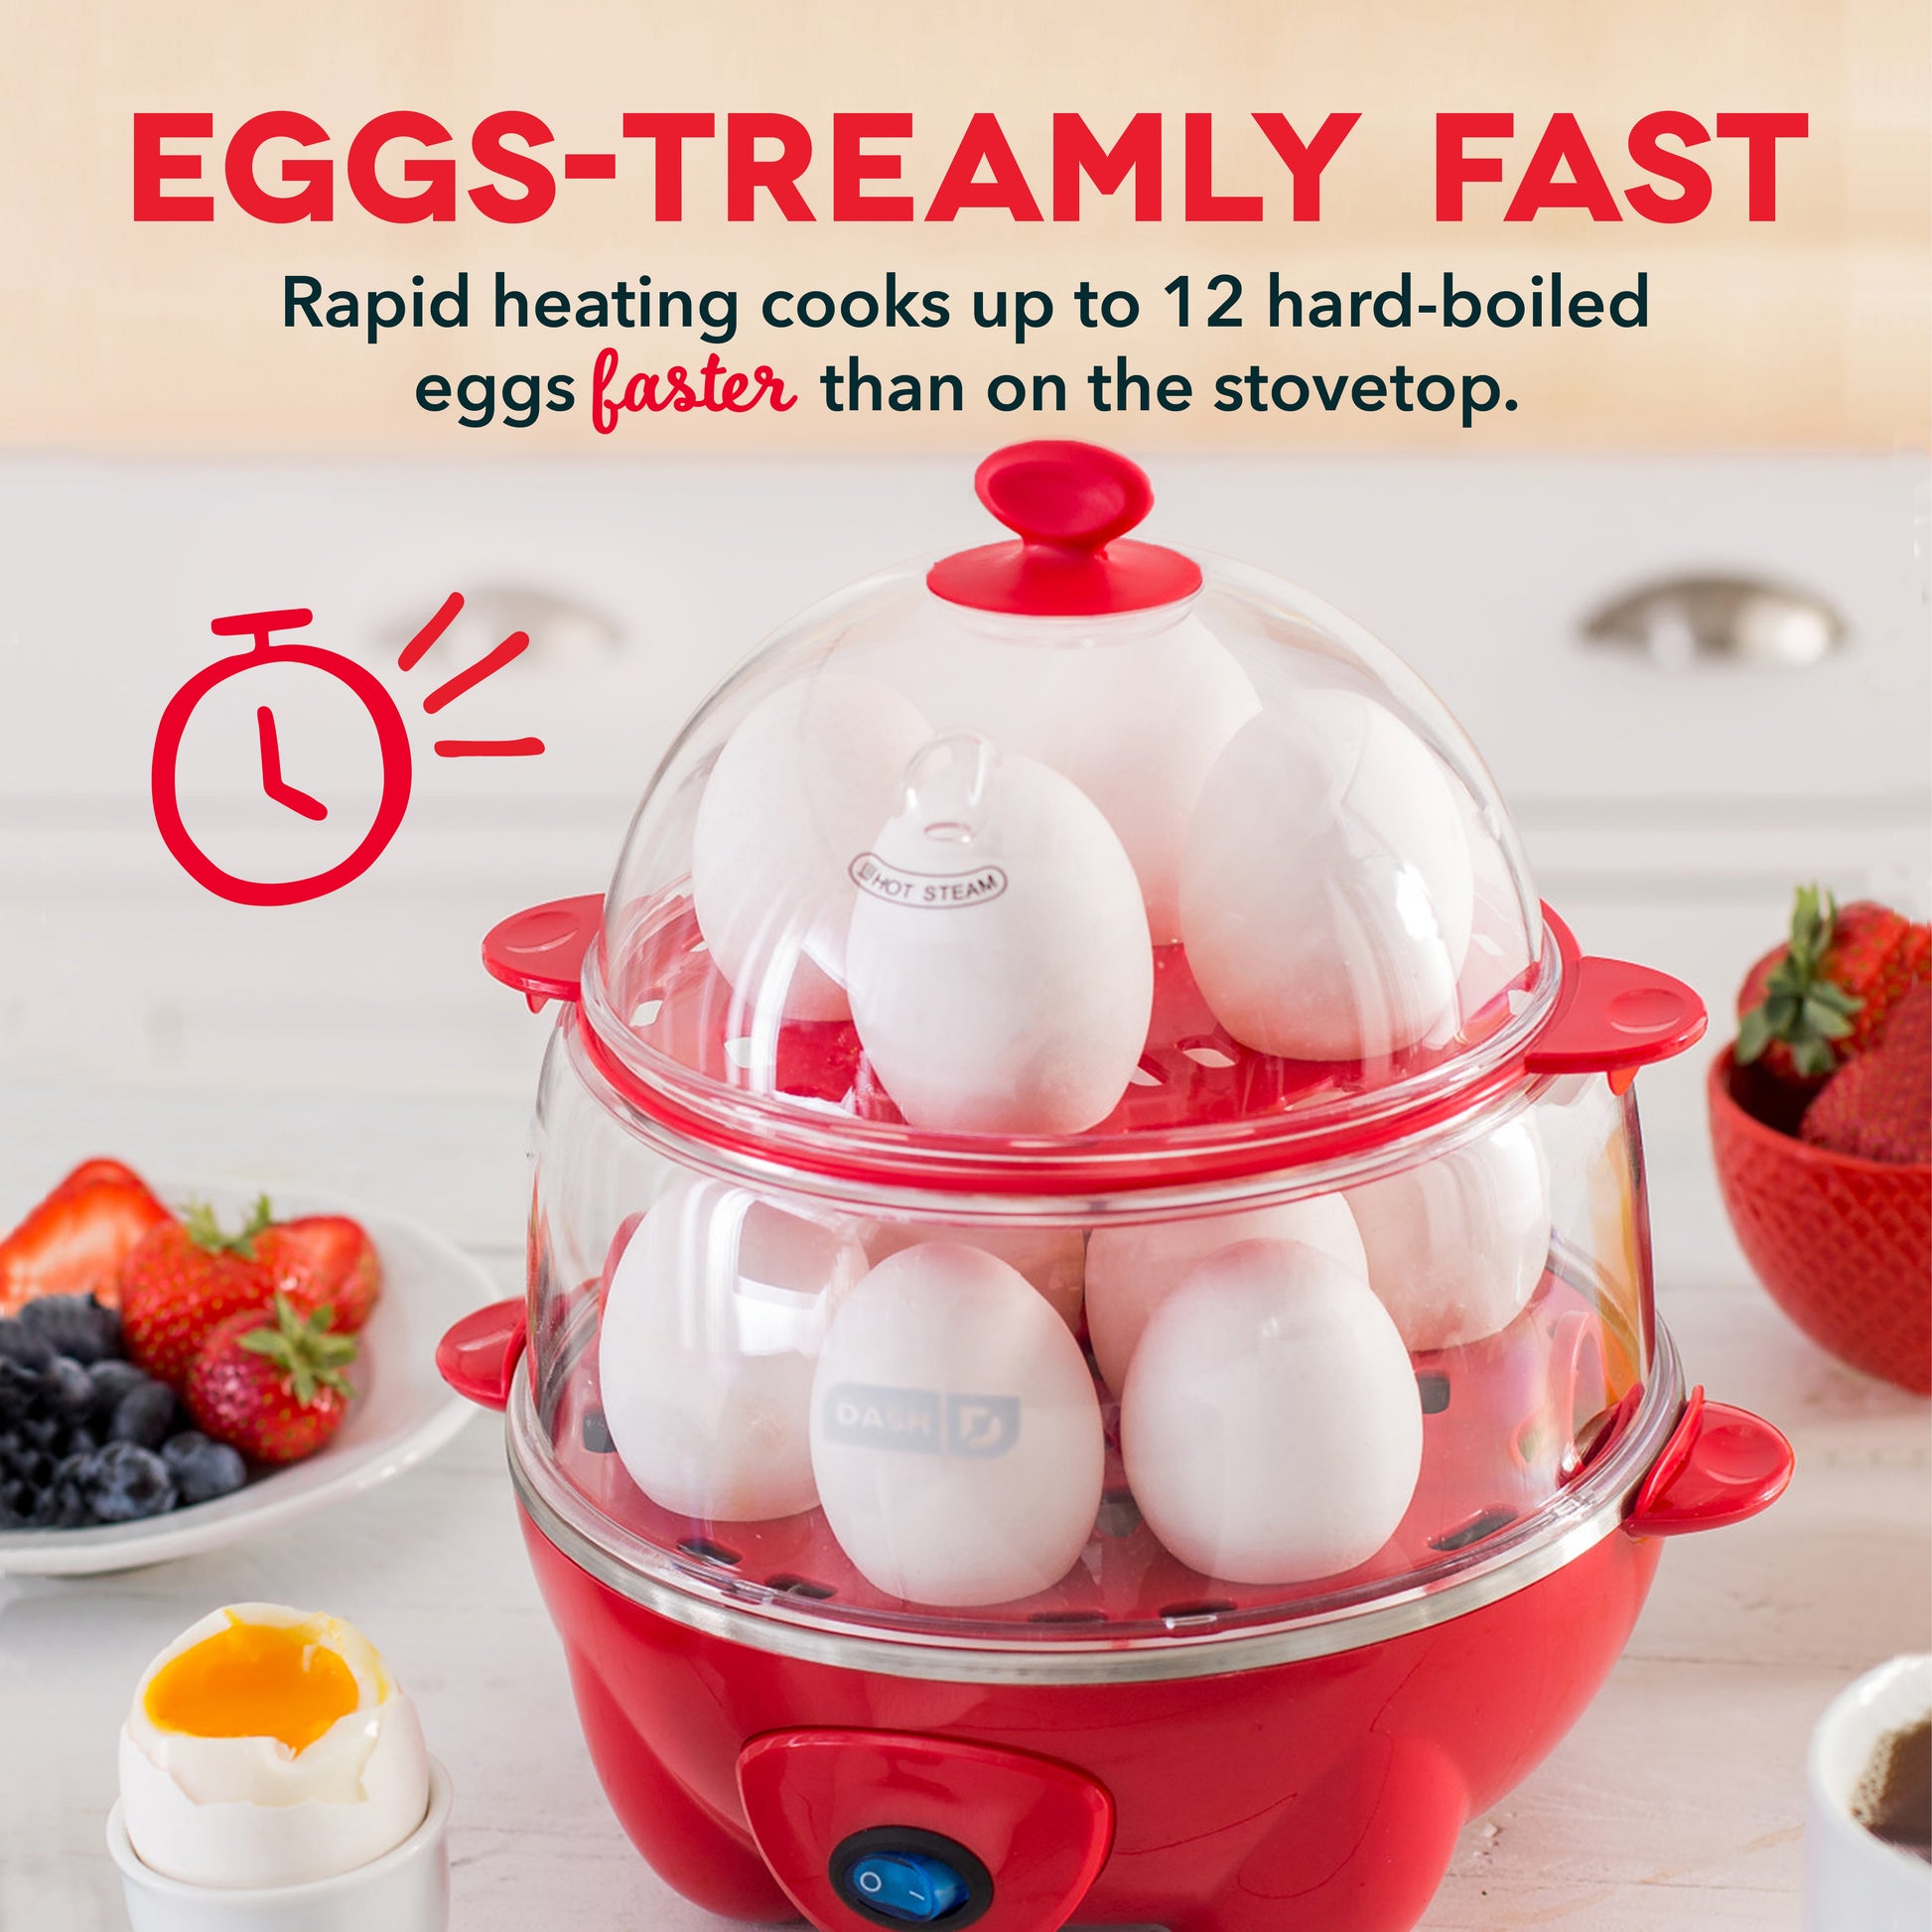 Rise By Dash Egg Cooker, Red 